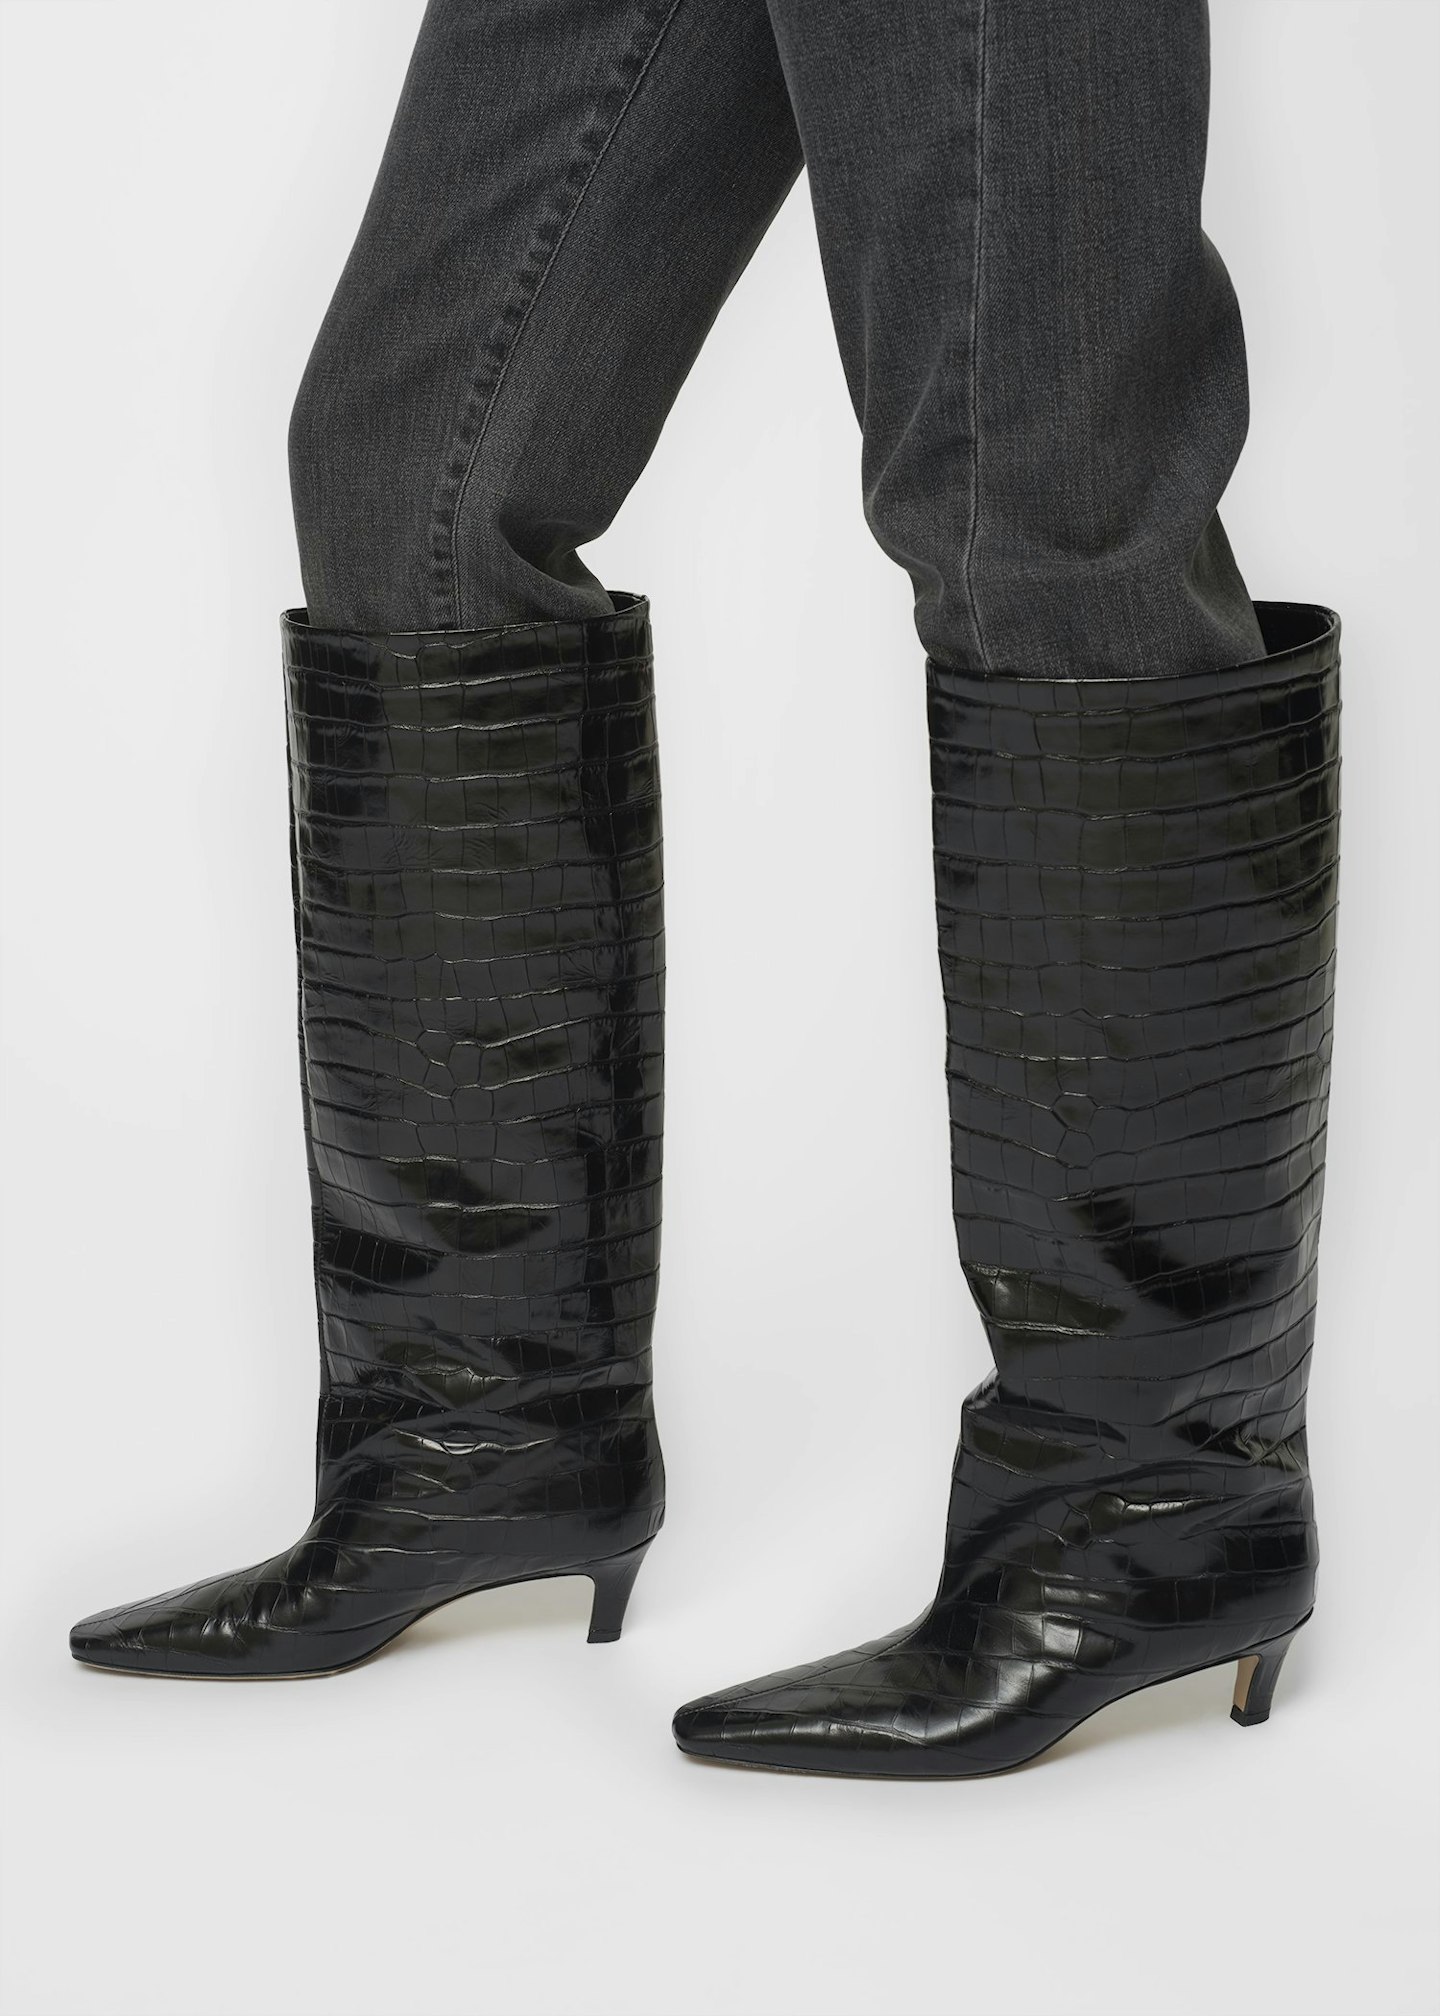 Toteme, The Wide Shaft Boot, £690